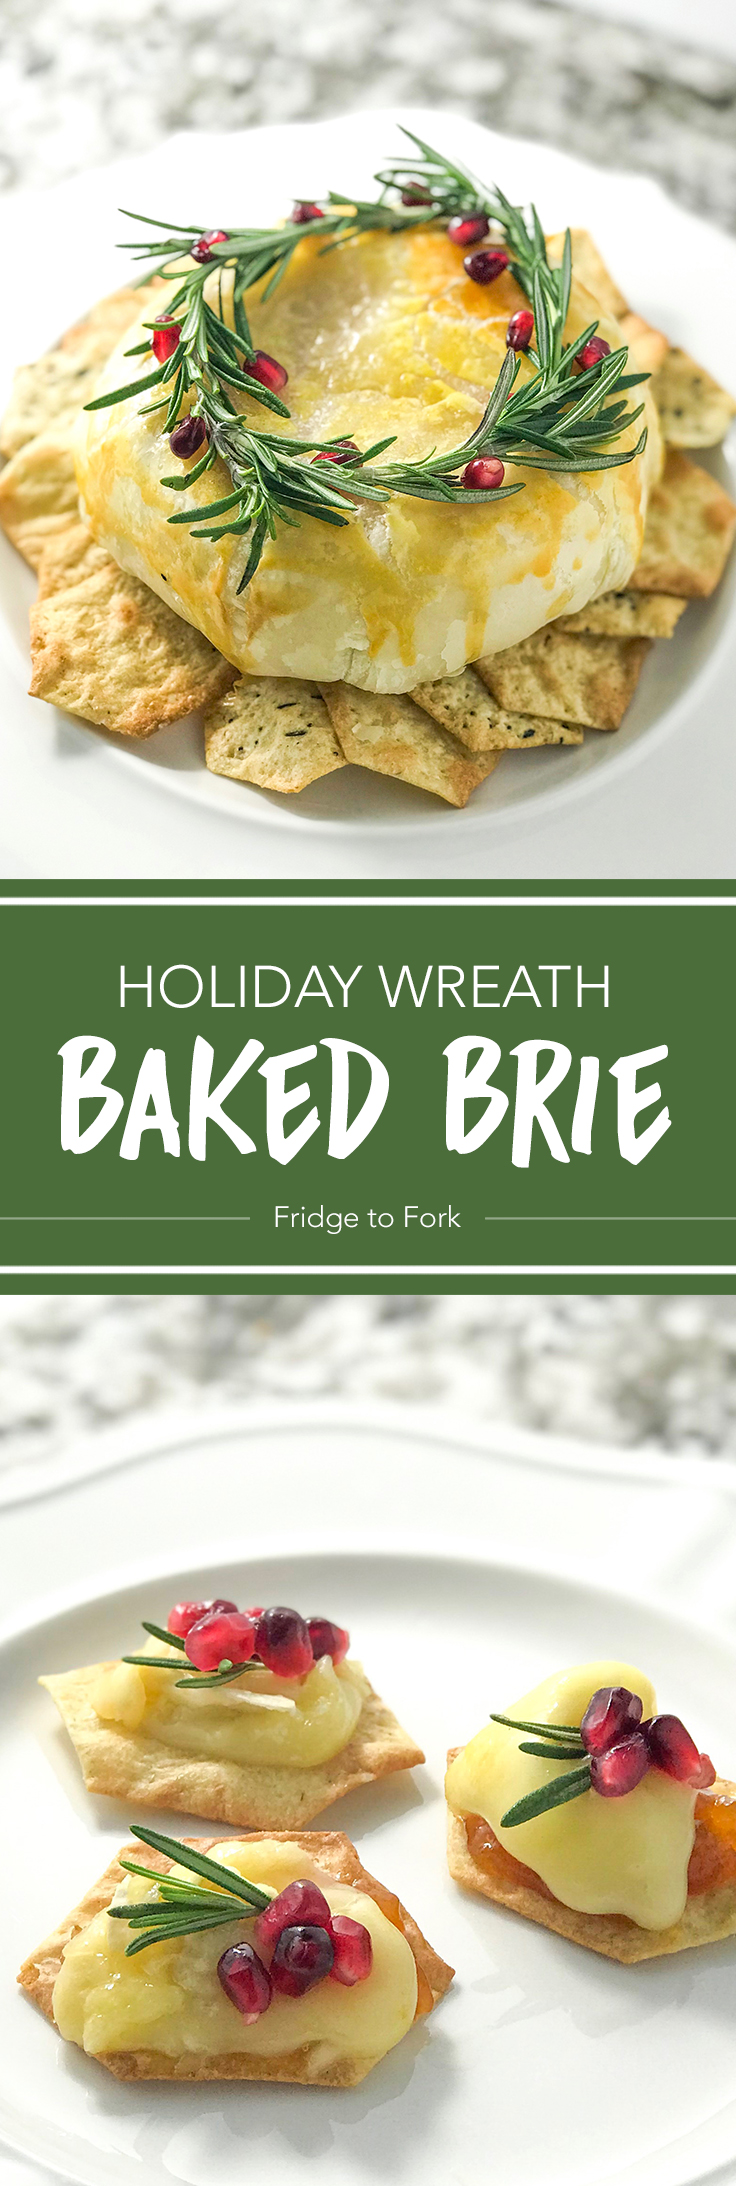 Holiday Wreath Baked Brie - Fridge to Fork